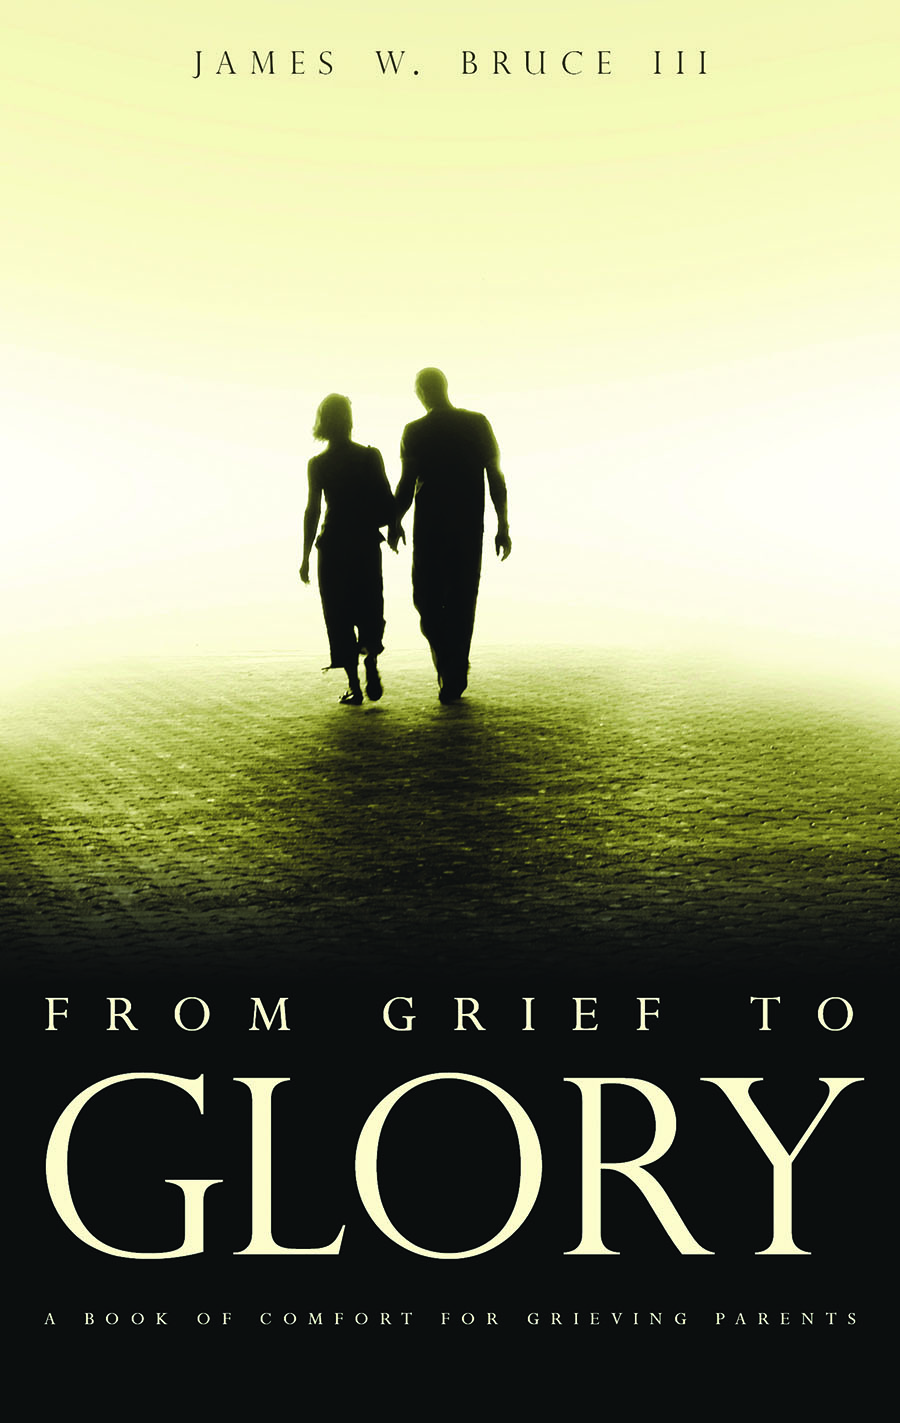 From Grief to Glory